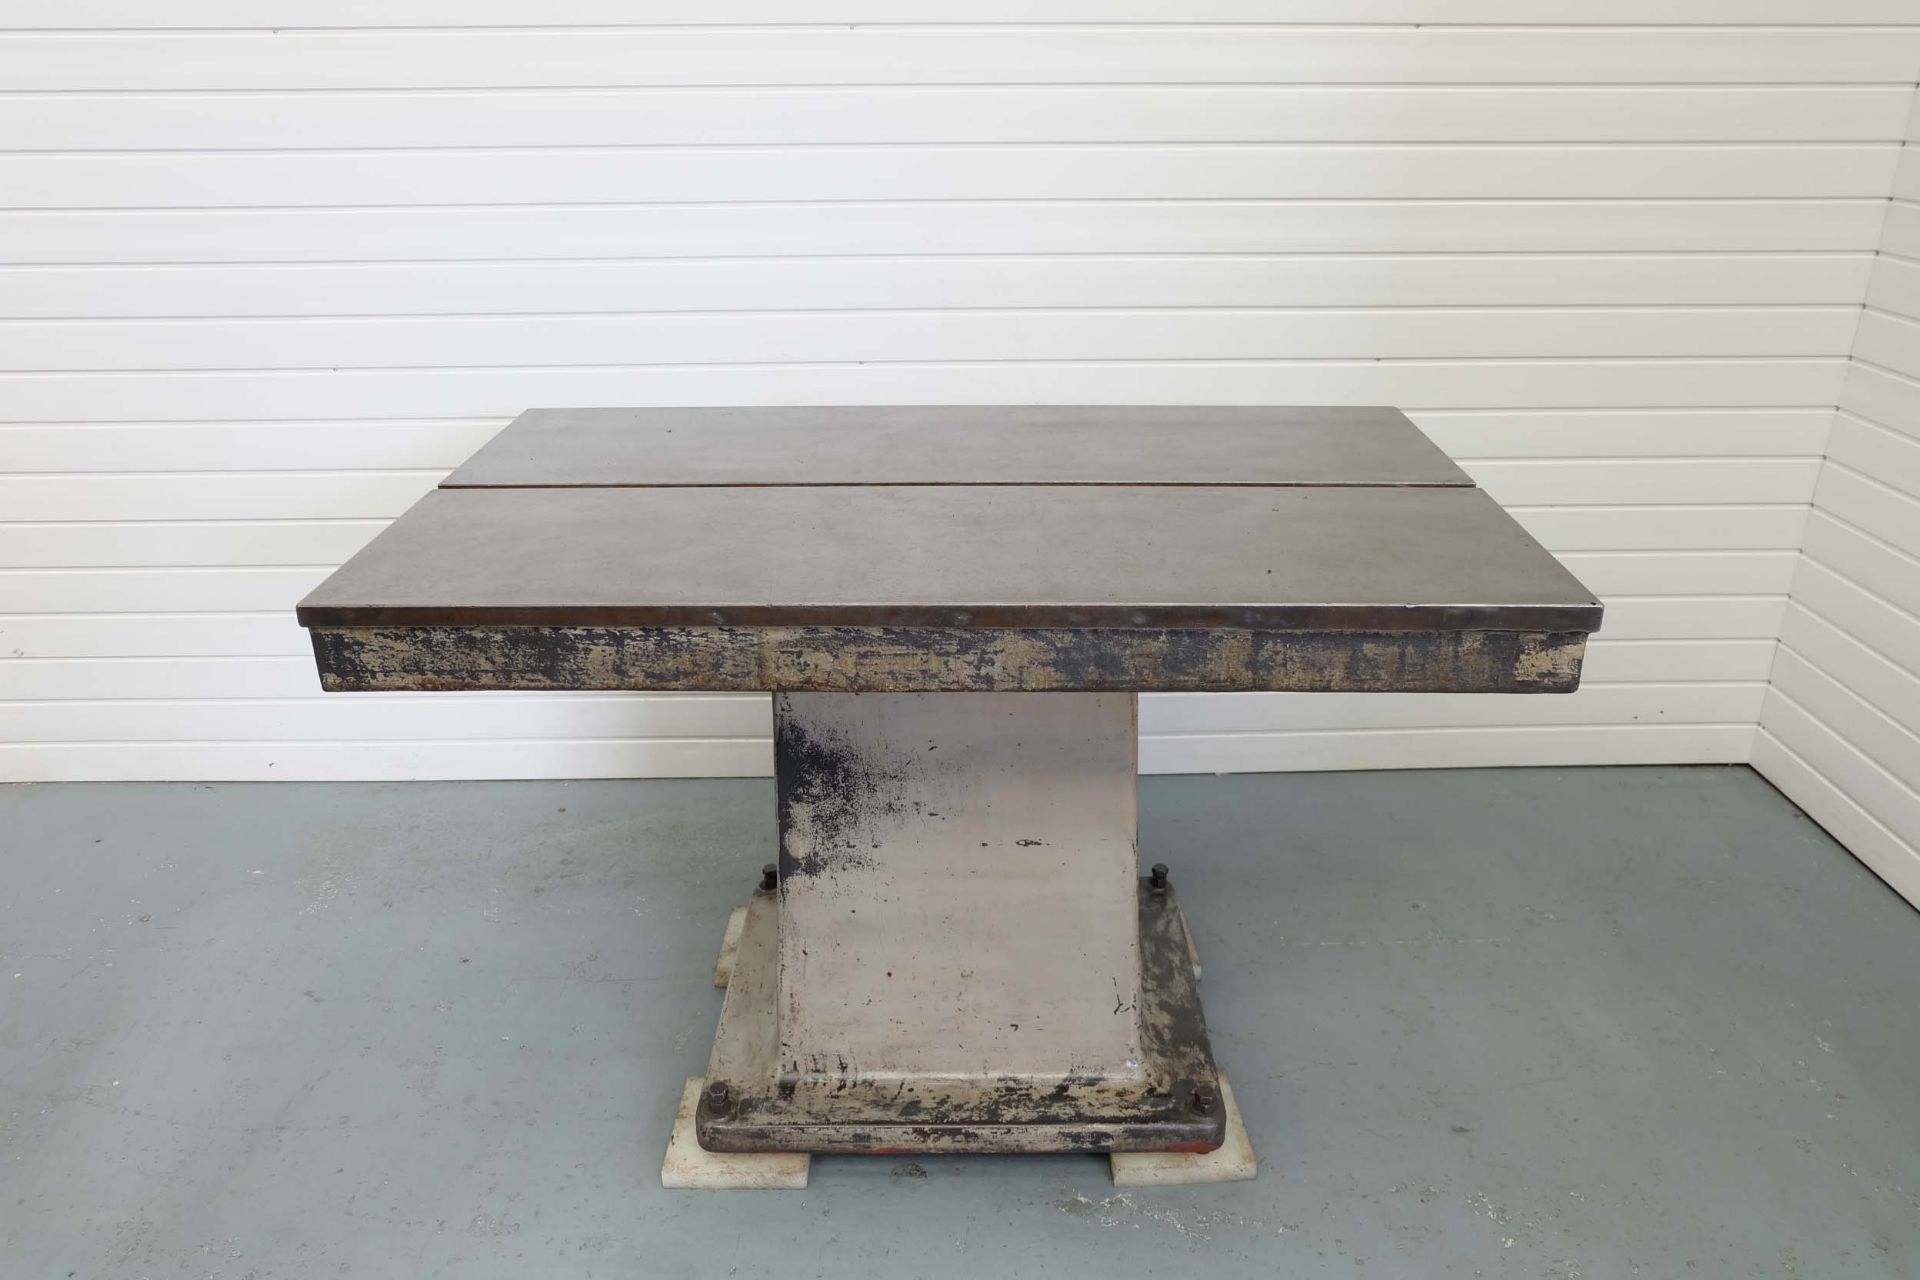 Cast Iron Surface Table With Tee Slot. Size 54" x 32". Surface Height 34".